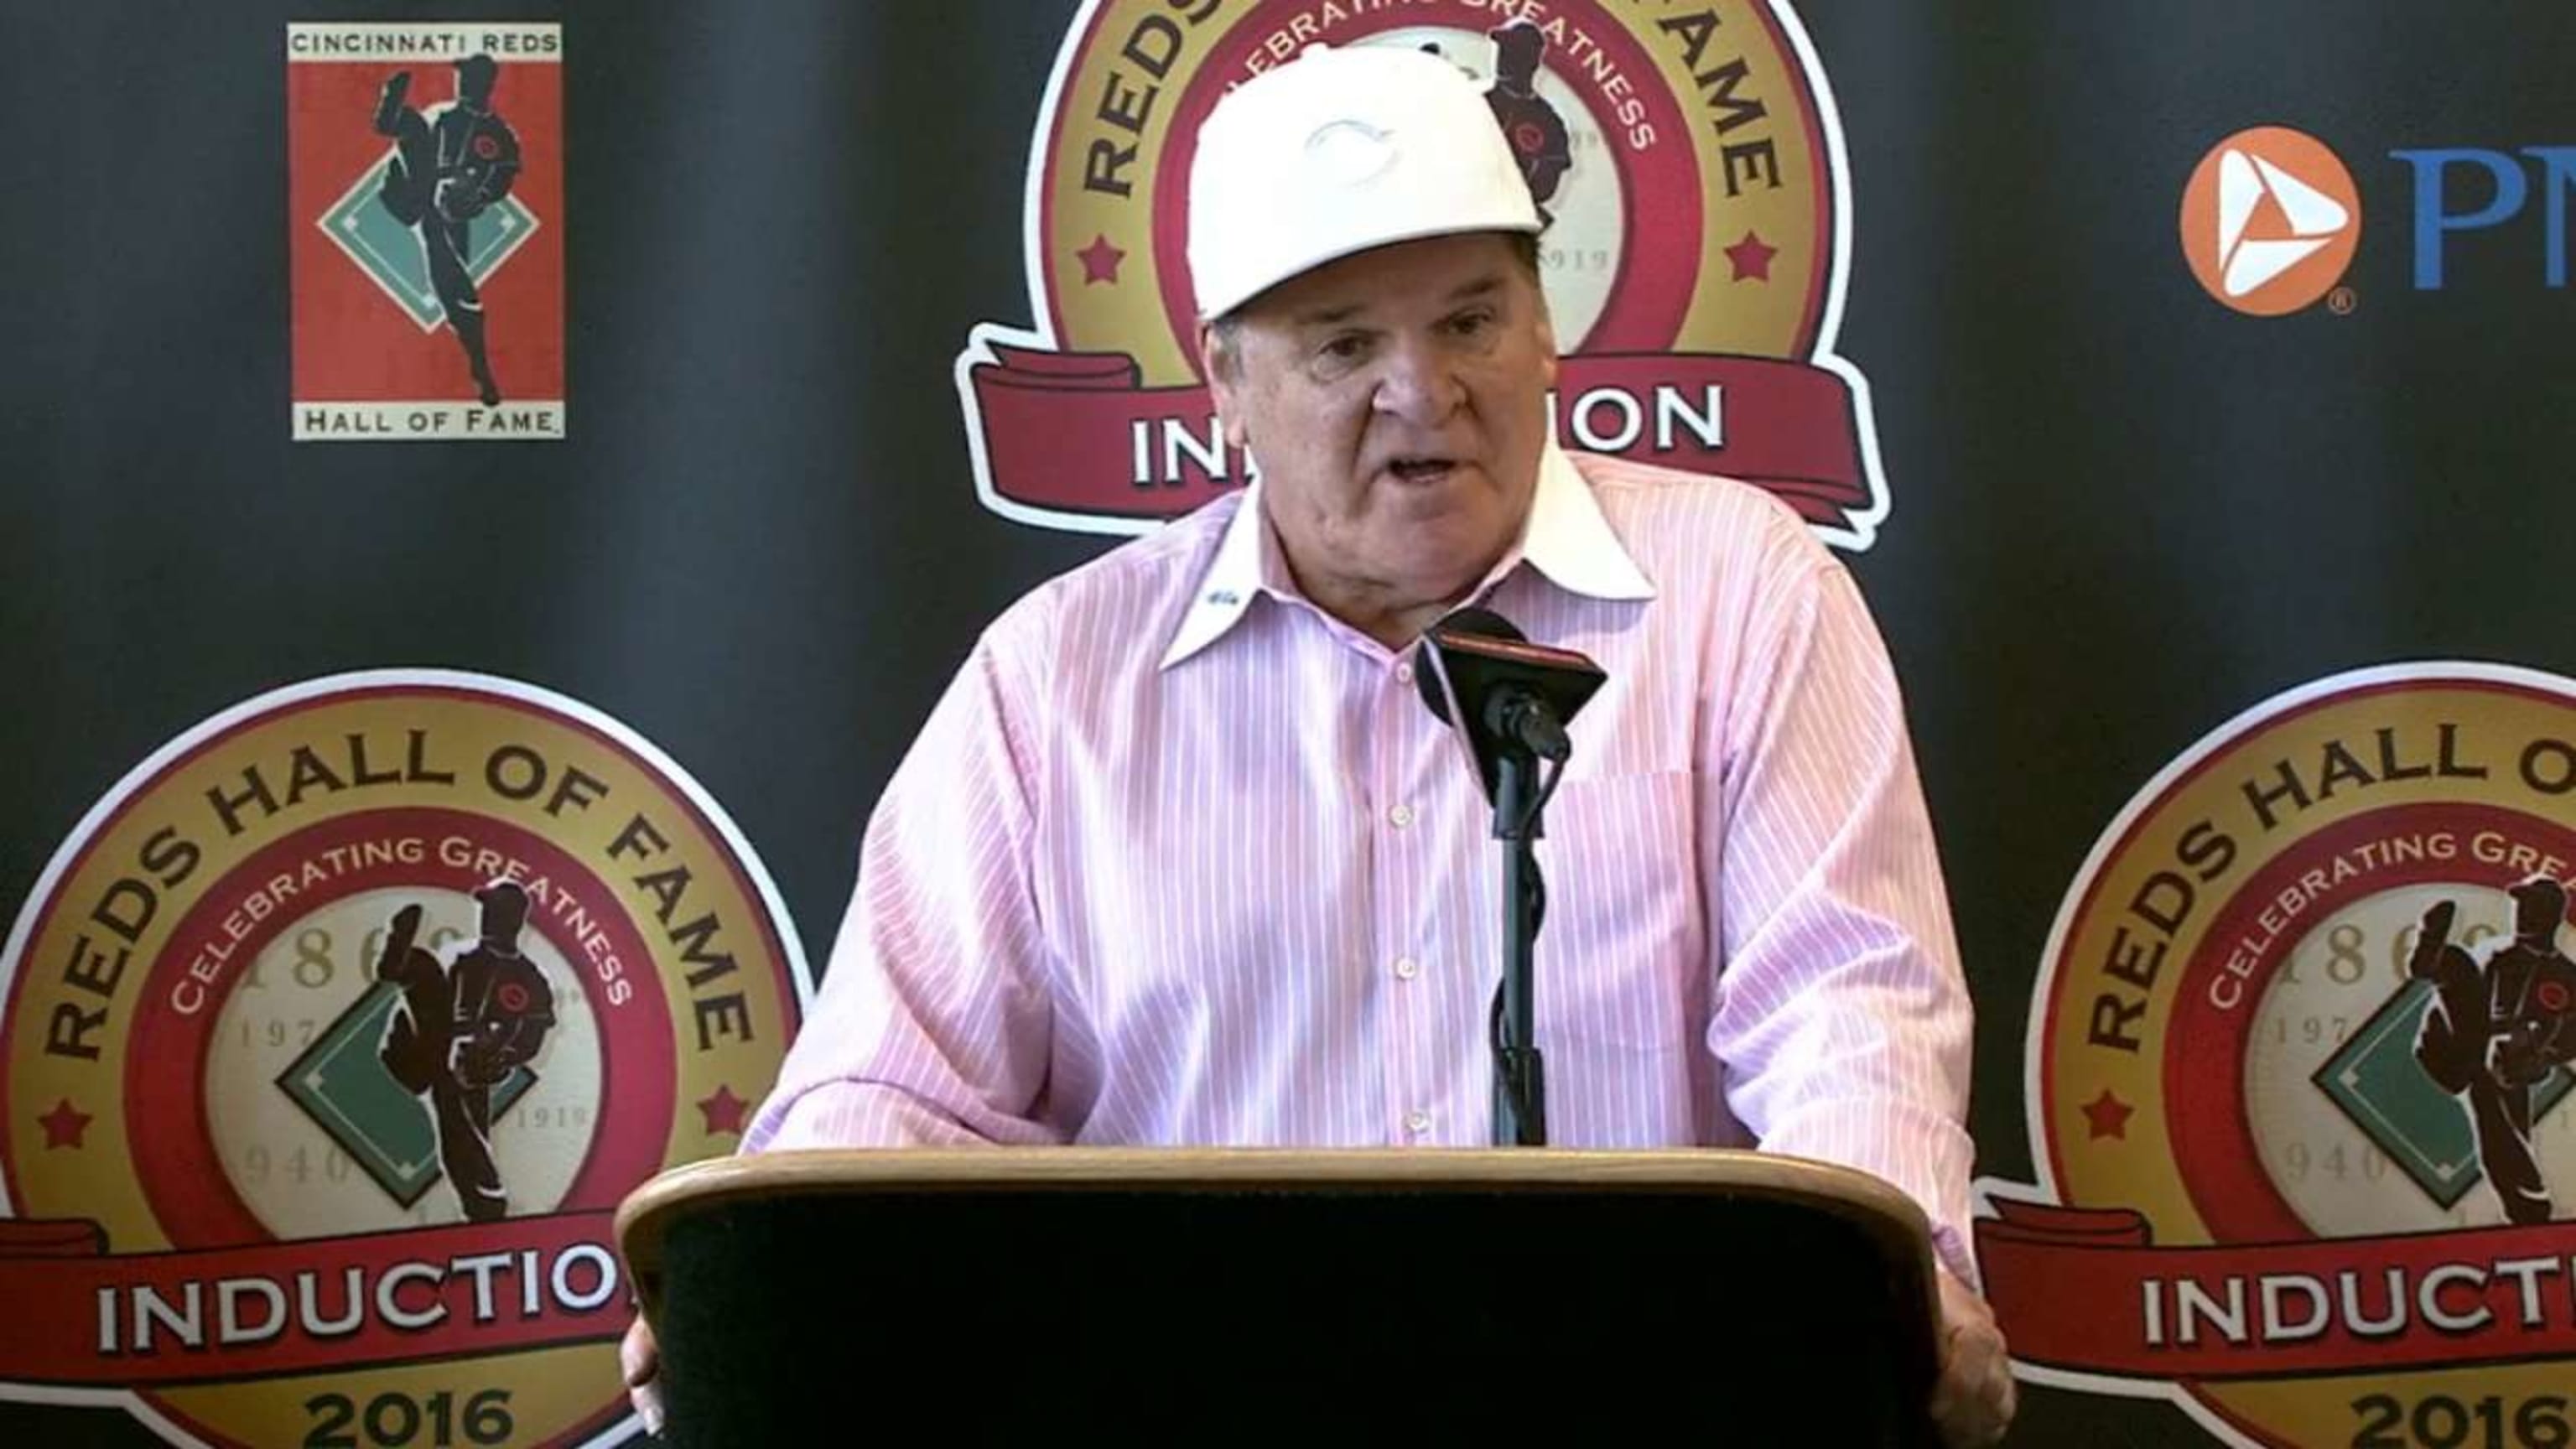 Pete Rose to Reds' Hall of Fame: 'Now is the time